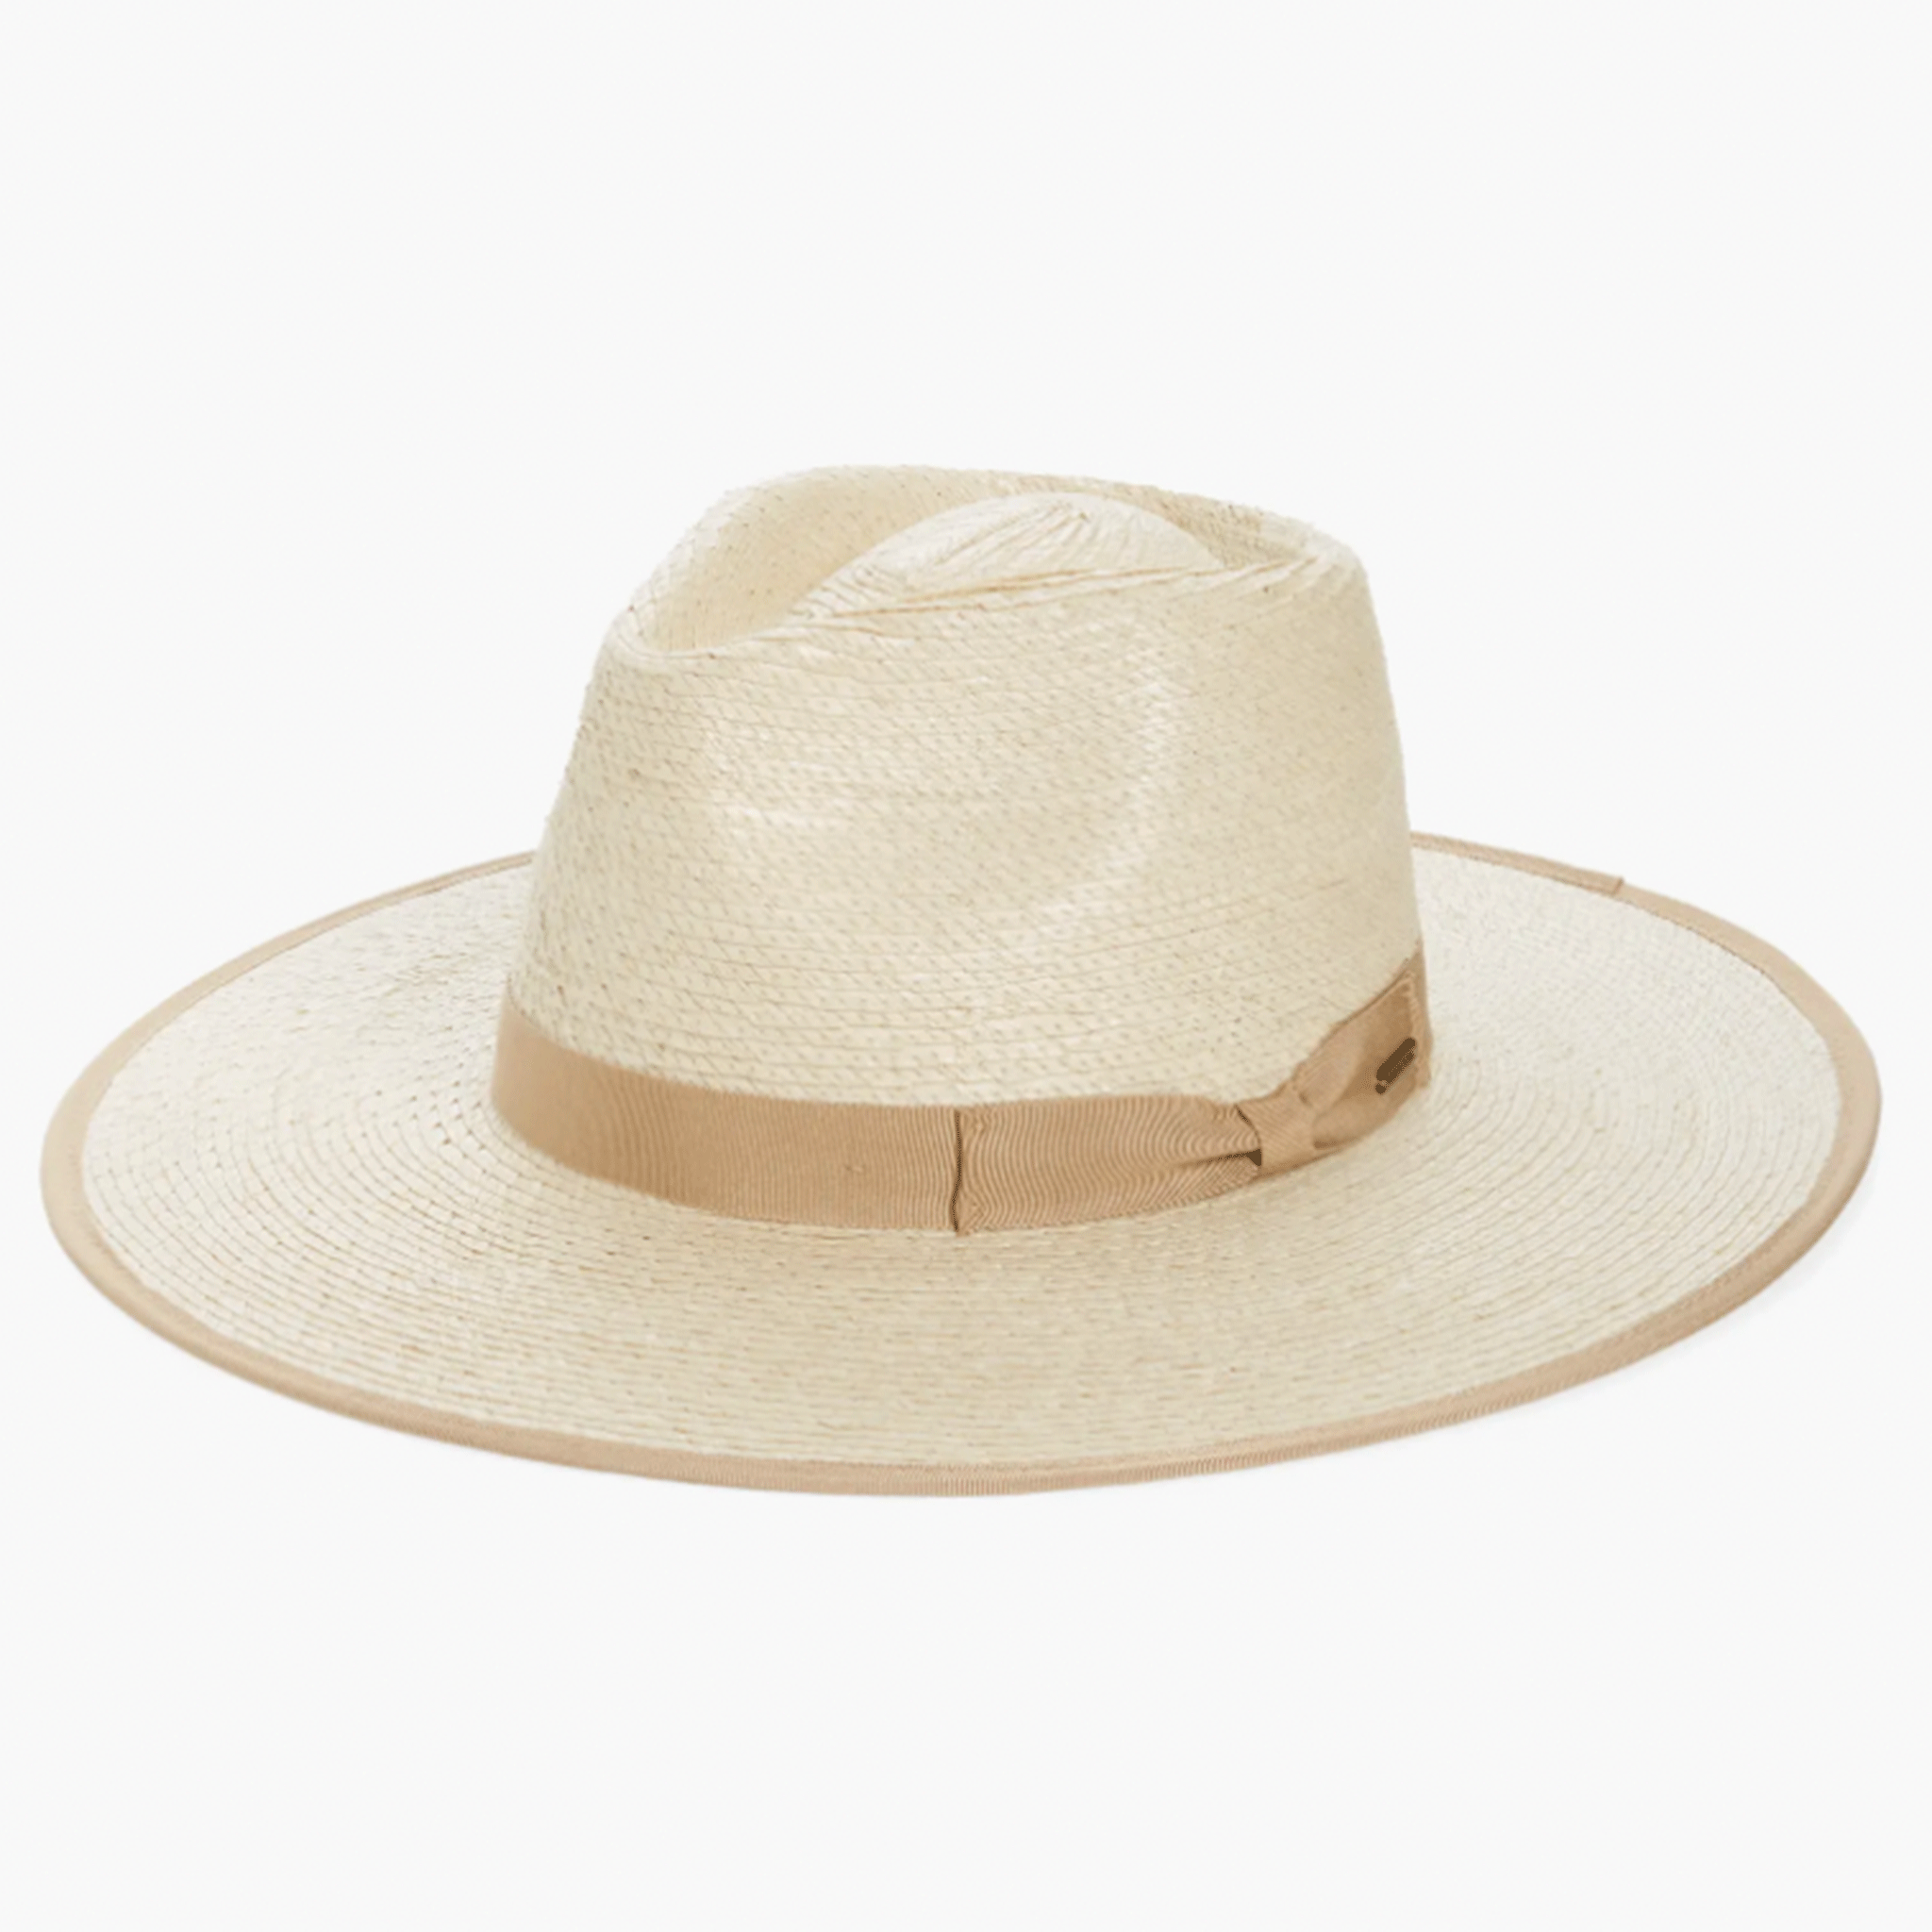 On a white background is a light tan colored straw sun hat with a ribbon edge and border around the base. 